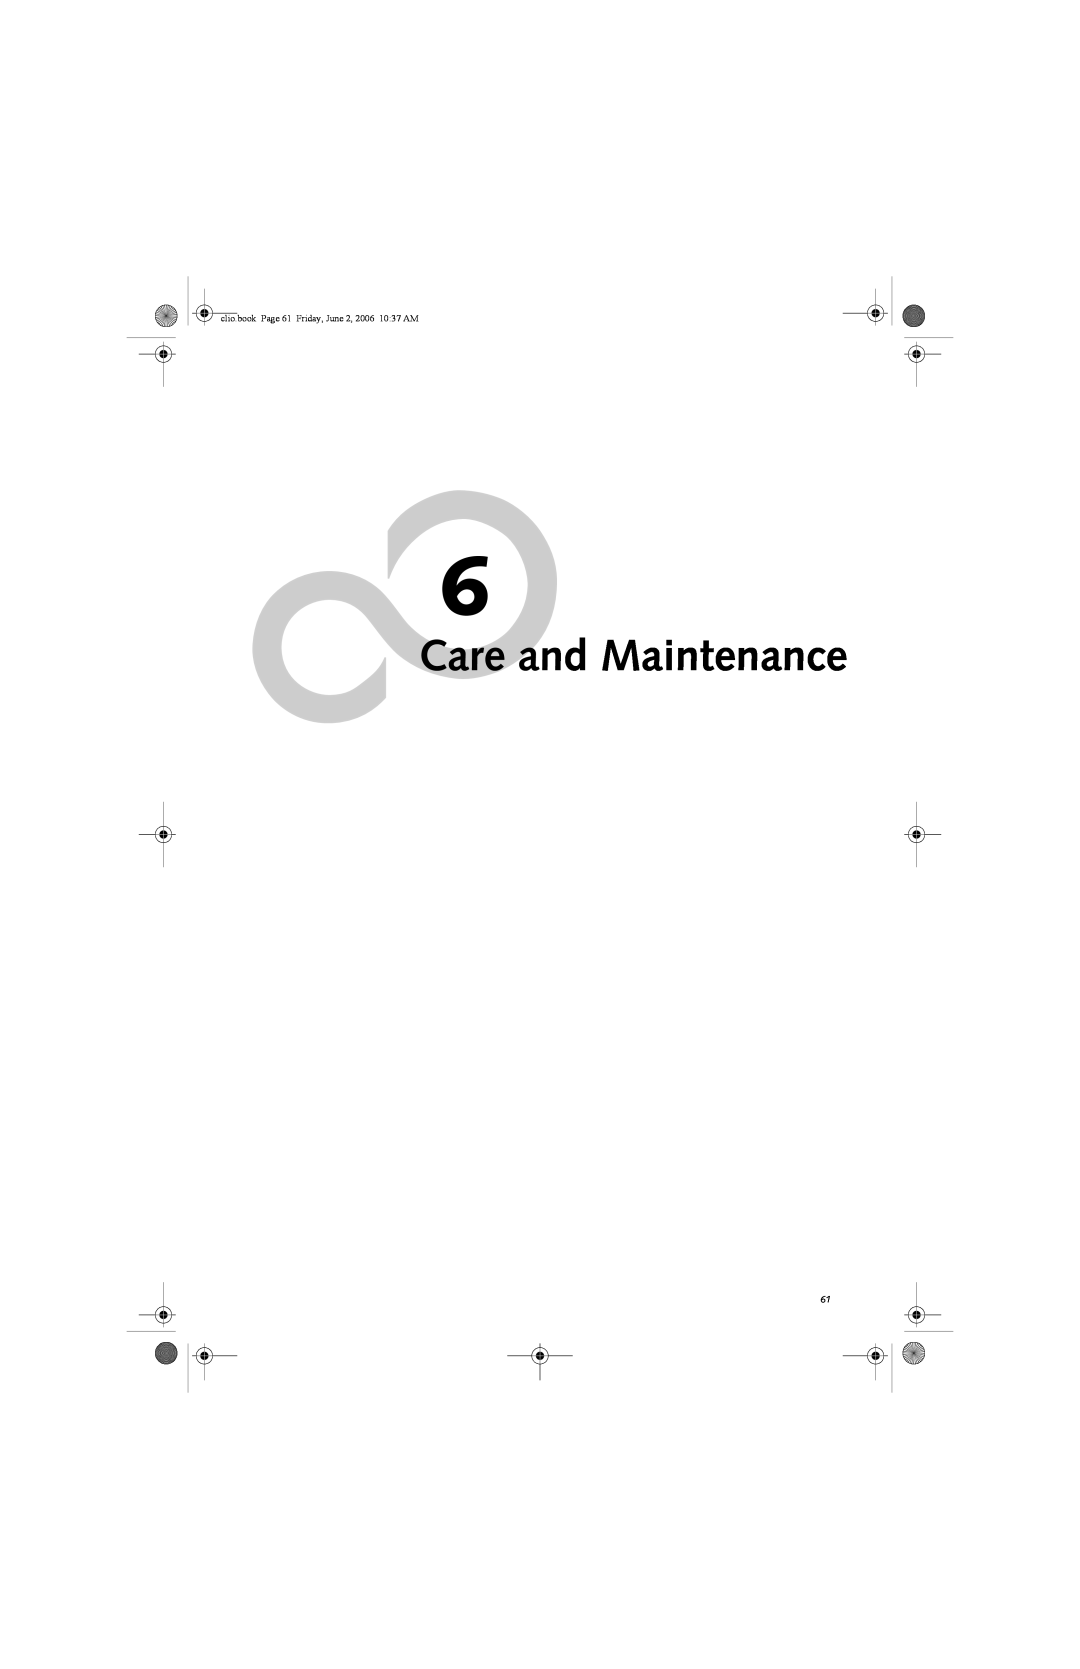 Fujitsu C1410 manual Care and Maintenance, clio.book Page 61 Friday, June 2, 2006 1037 AM 